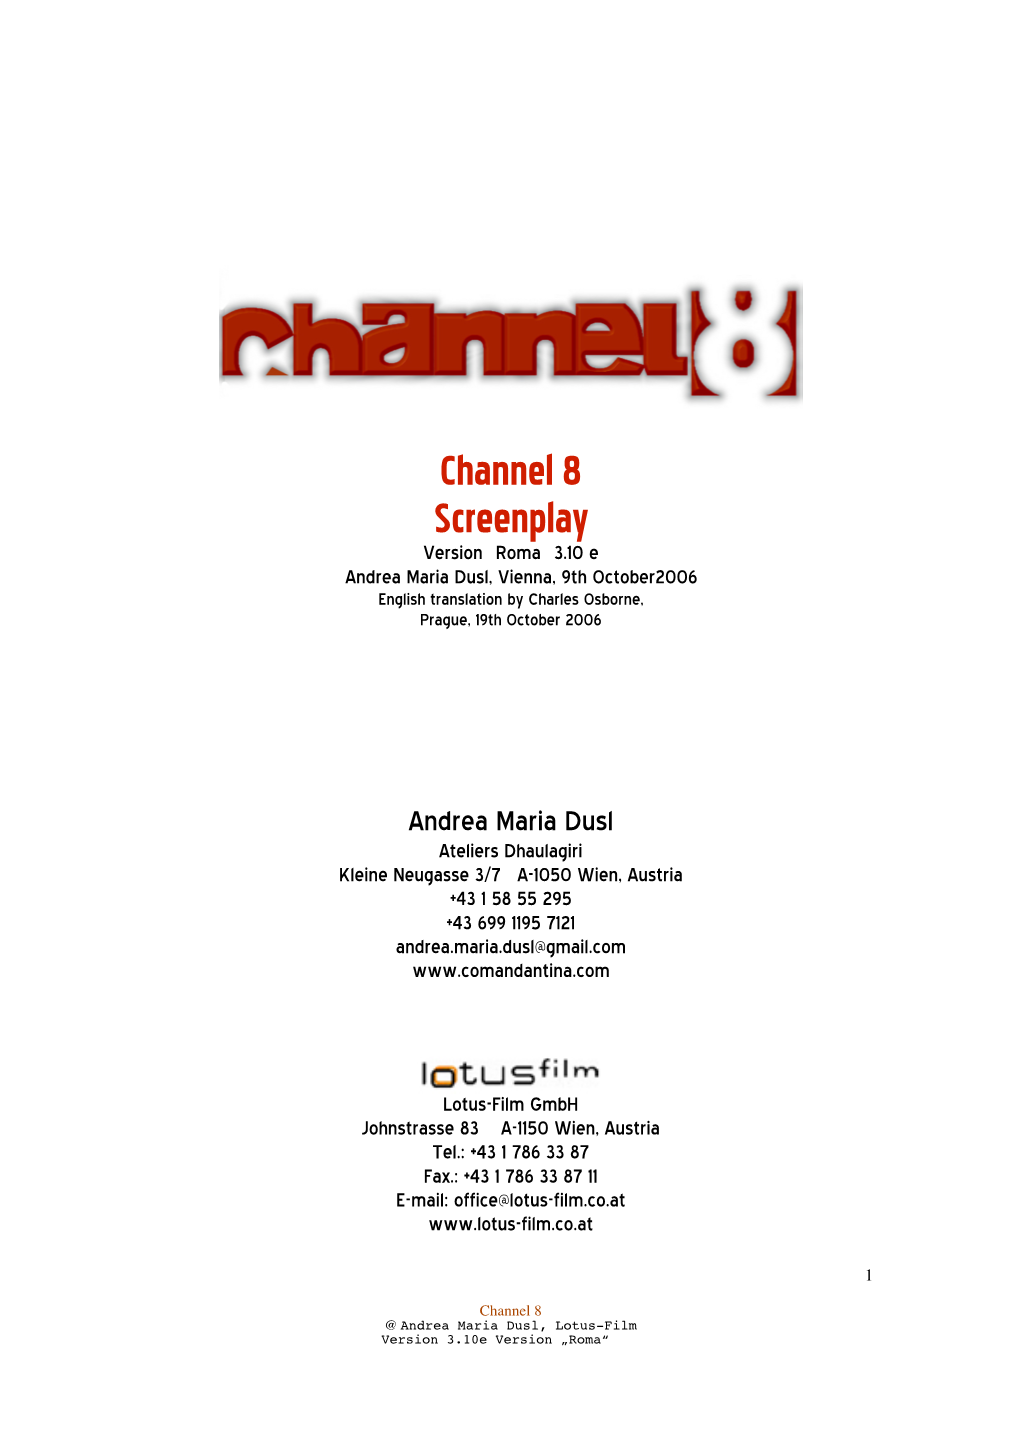 Channel 8 Screenplay Version “Roma” 3.10 E © Andrea Maria Dusl, Vienna, 9Th October2006 English Translation by Charles Osborne, Prague, 19Th October 2006